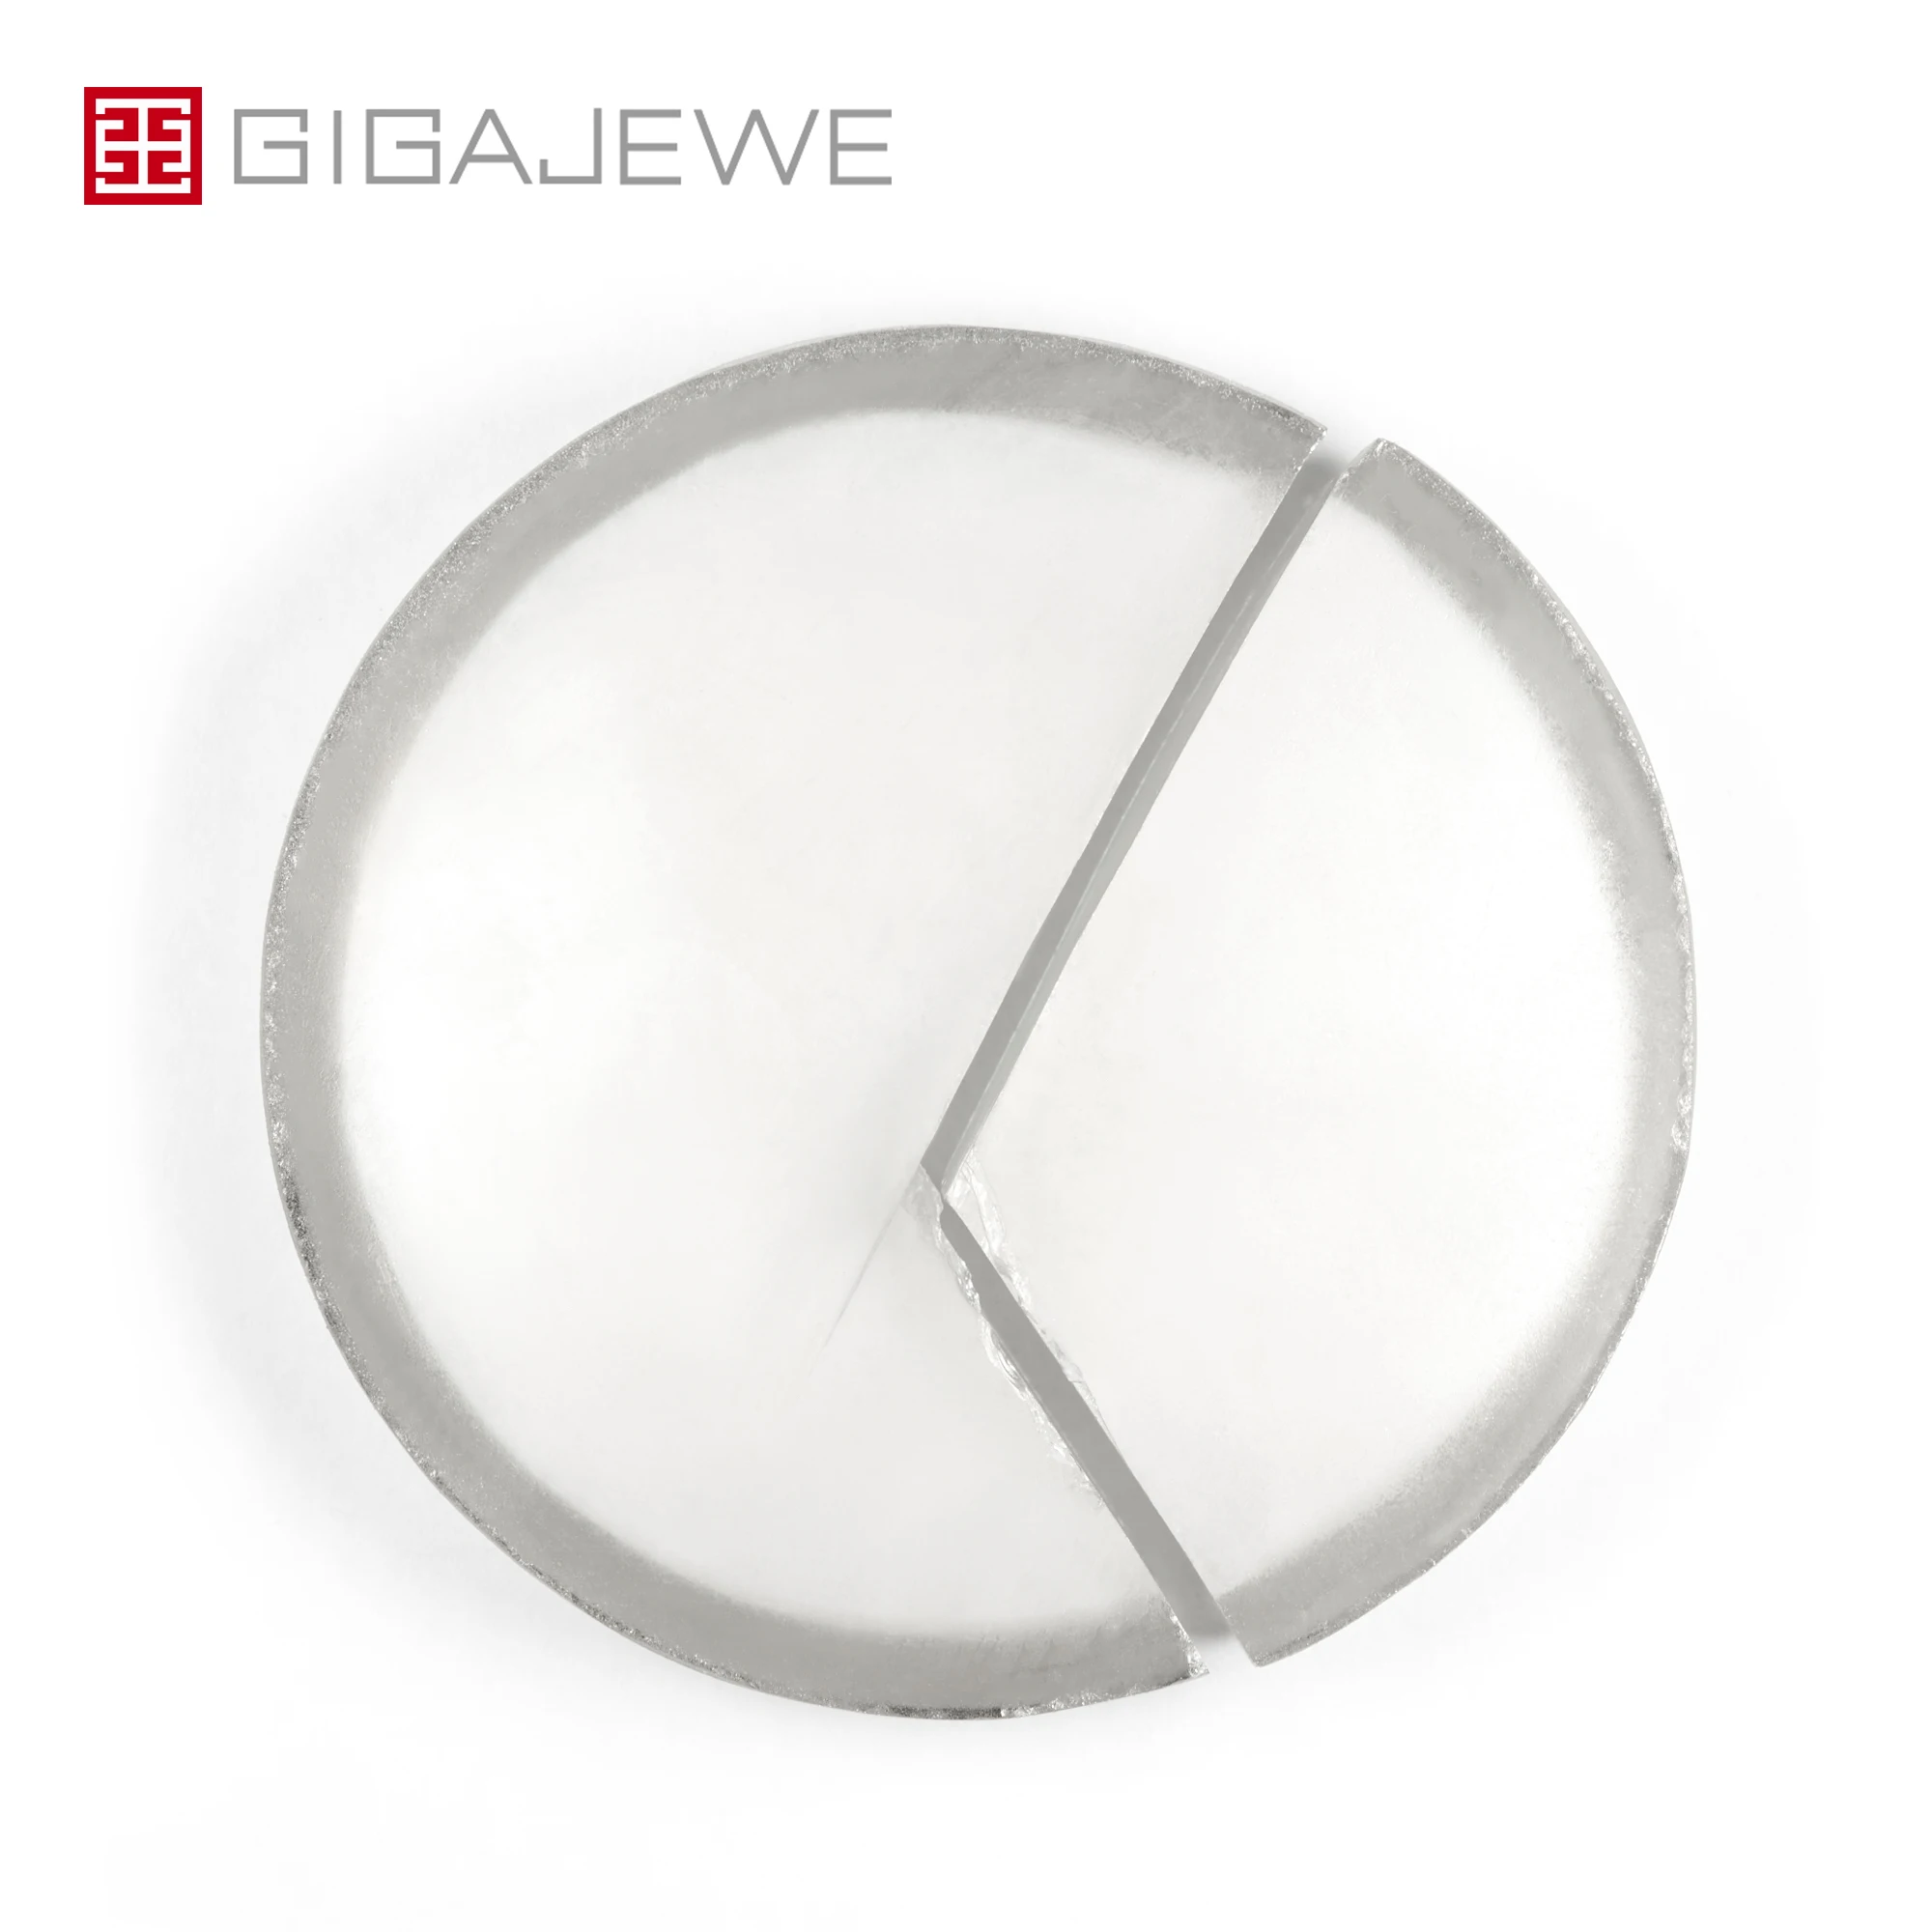 

GIGAJEWE Synthetic Diamond Stone White DEF Color Gemstone Making Jewelry Raw Material Moissanite Rough, Full white